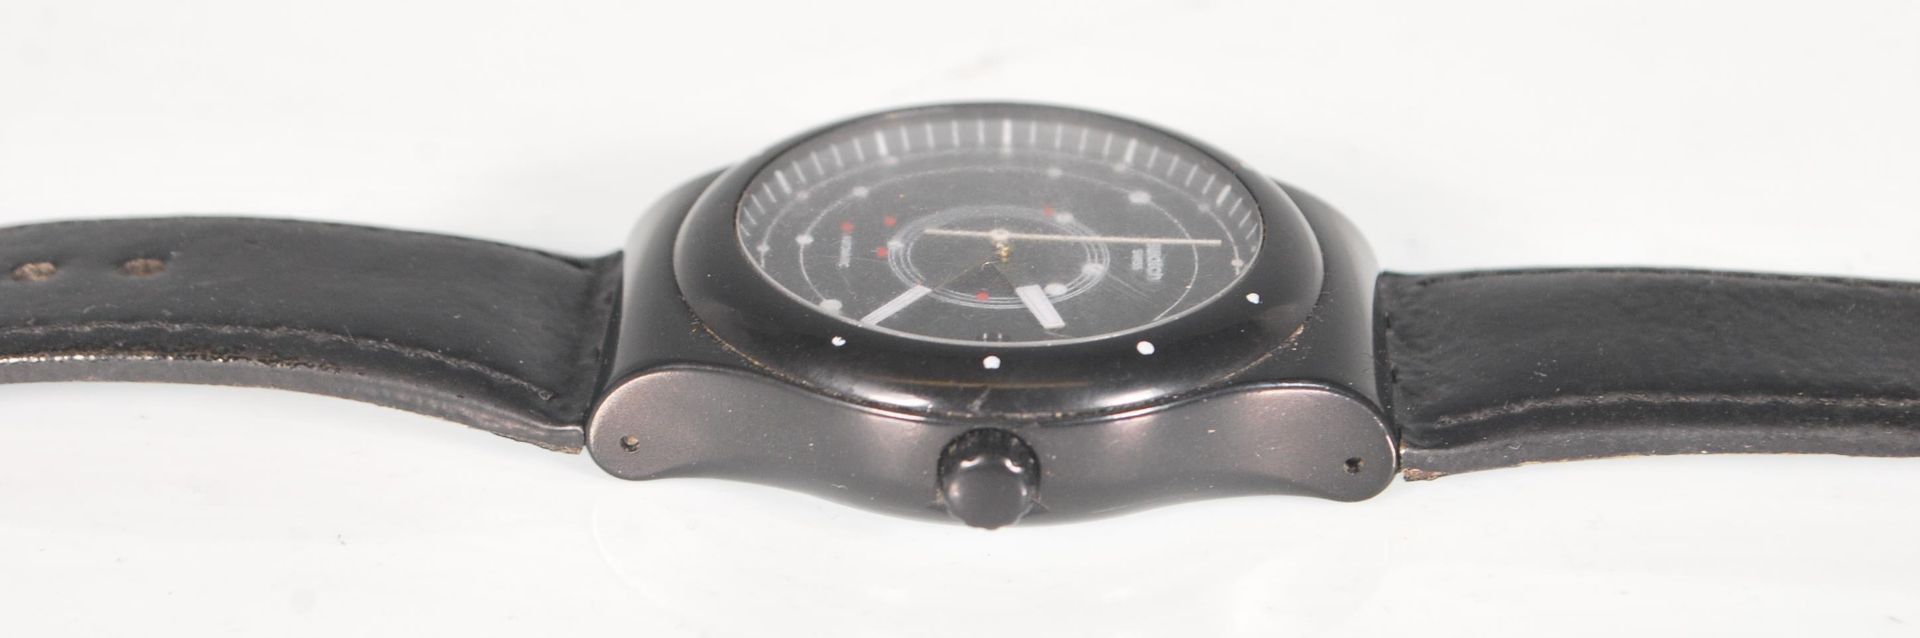 A Swatch Swiss Automatic wrist watch having a black face with a satellite design dial and date - Bild 3 aus 4